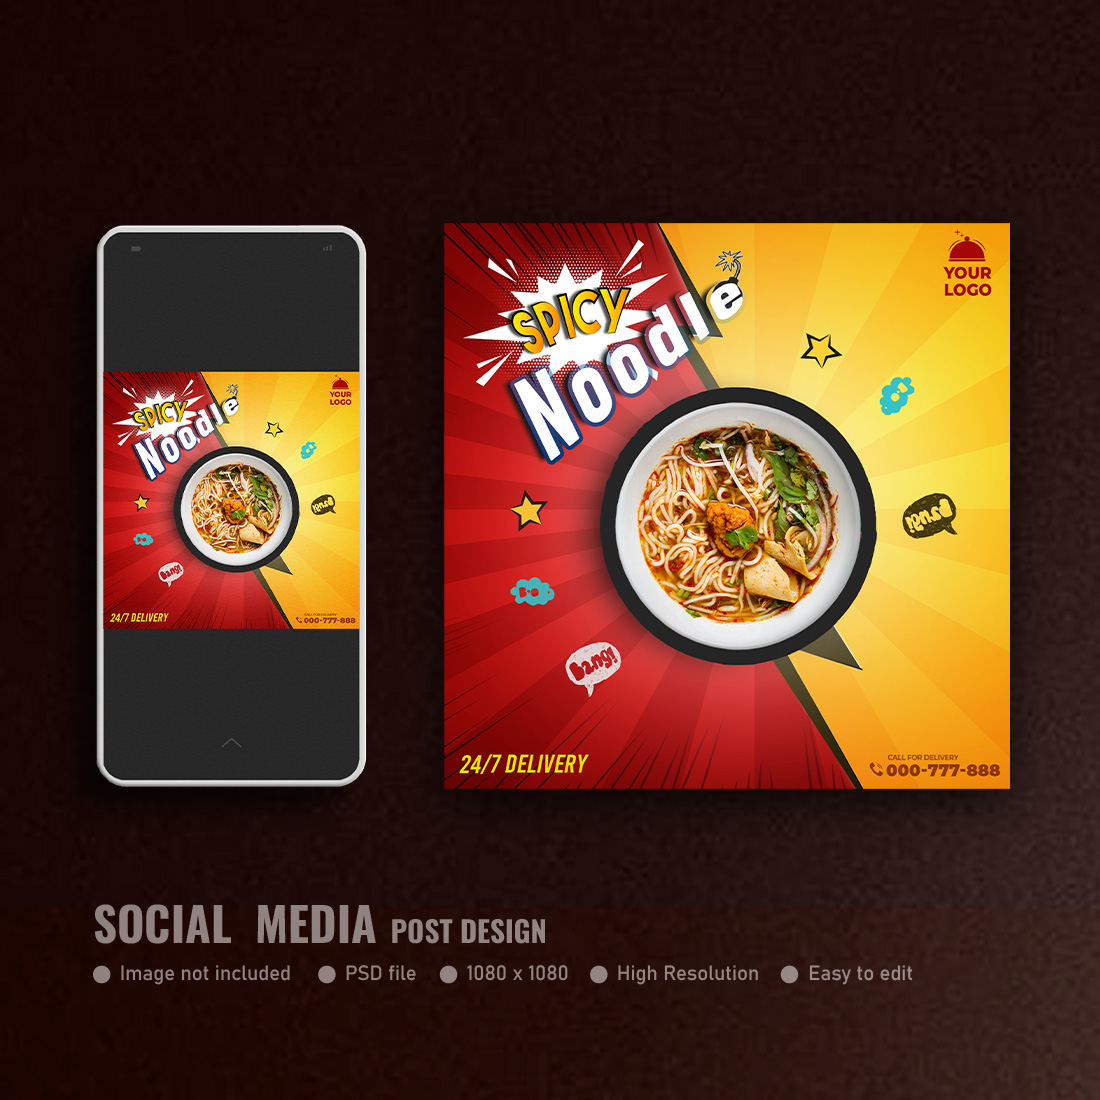 Spicy noodles social media banner template 2 preview image.